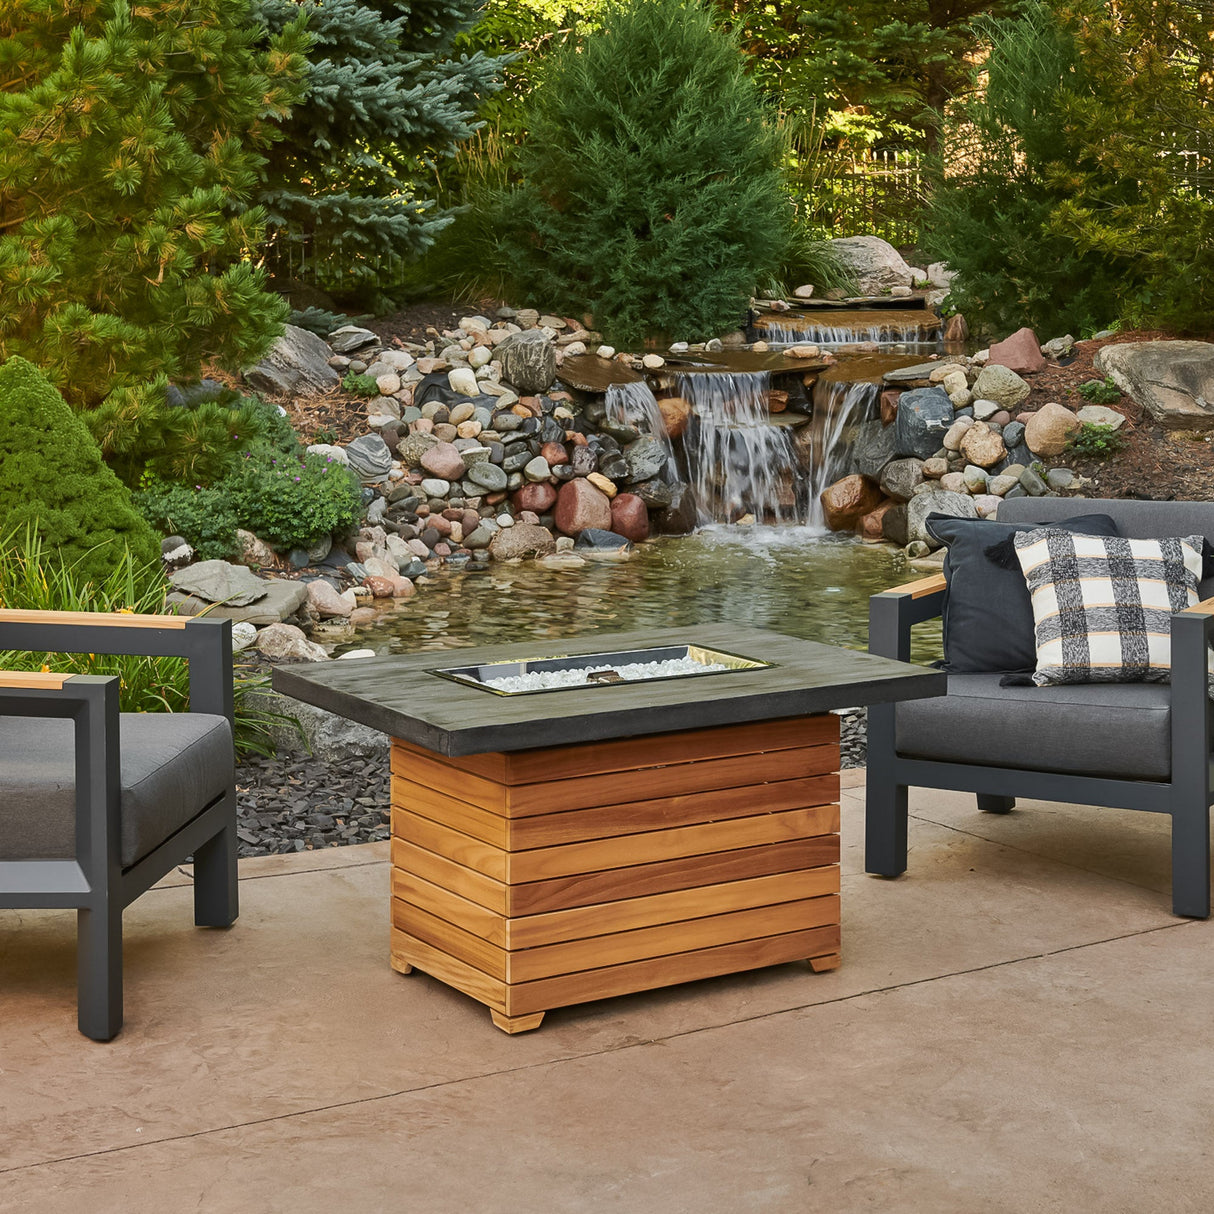 The Darien Rectangular Gas Fire Pit Table with an Everblend top next to a small waterfall and patio furniture